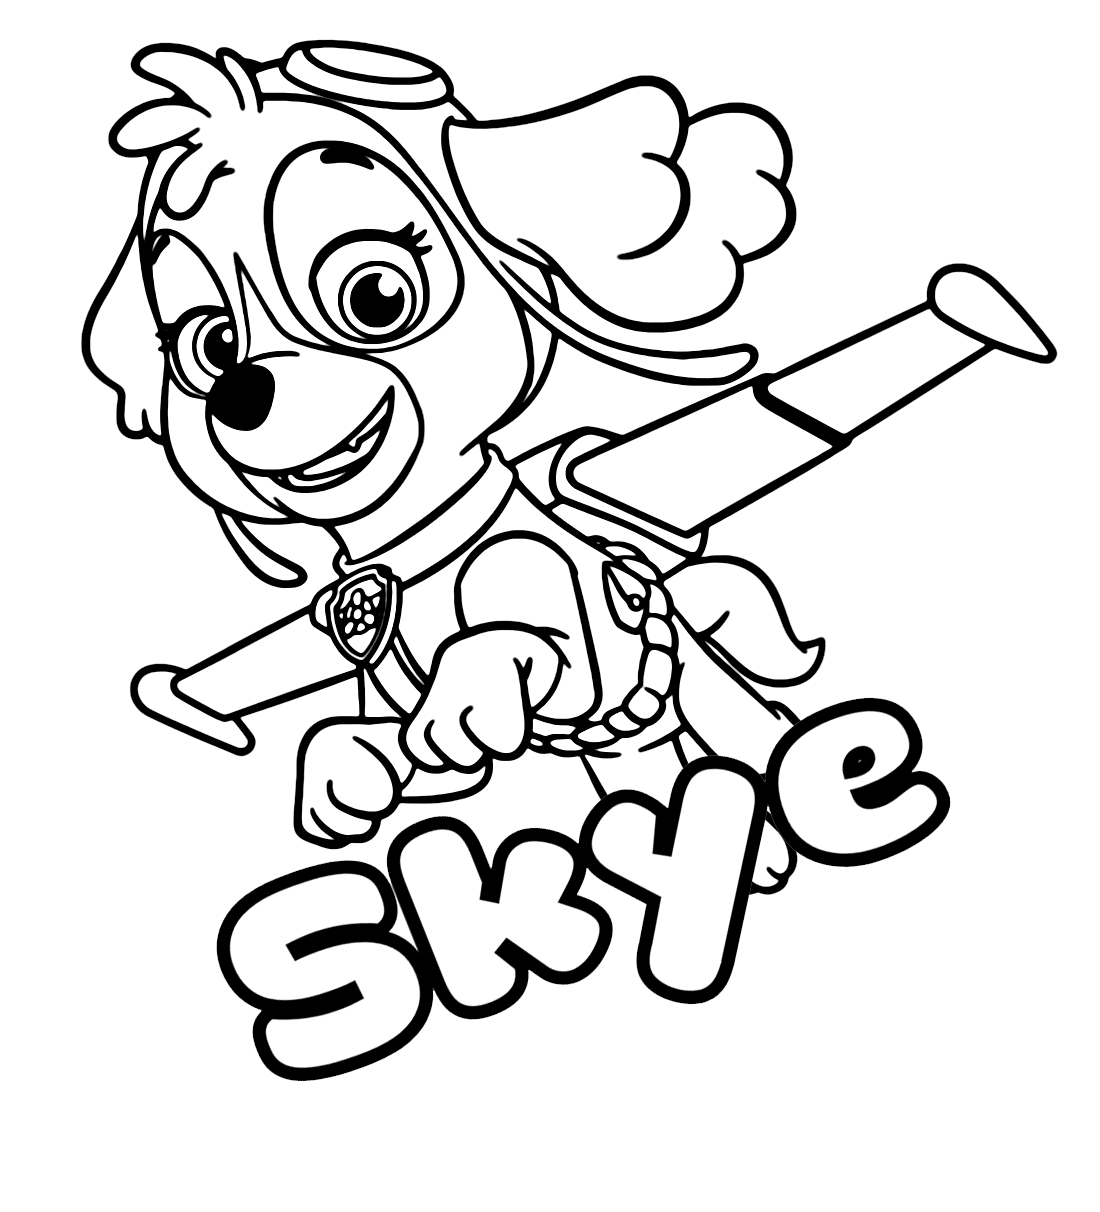 Skye Paw Patrol Images Coloring Pages